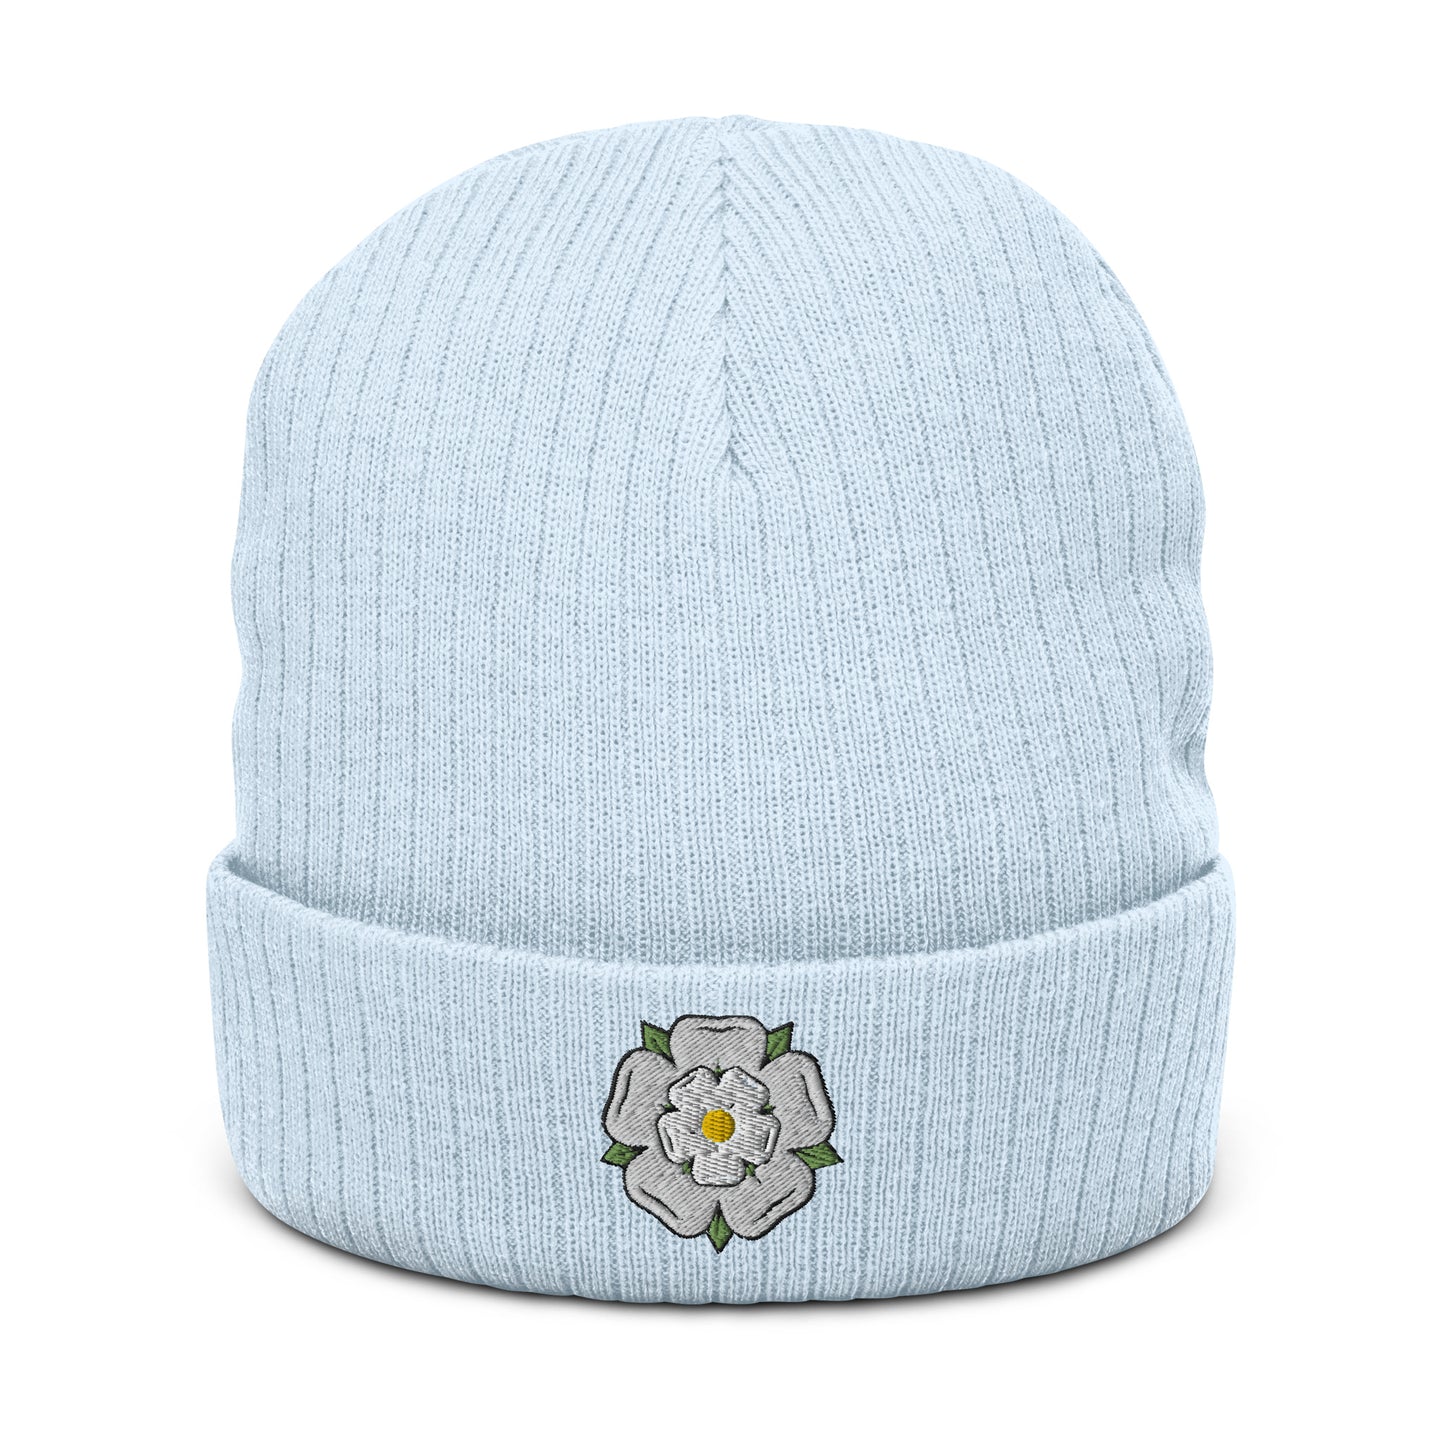 Yorkshire white rose ribbed knit beanie - HipHatter